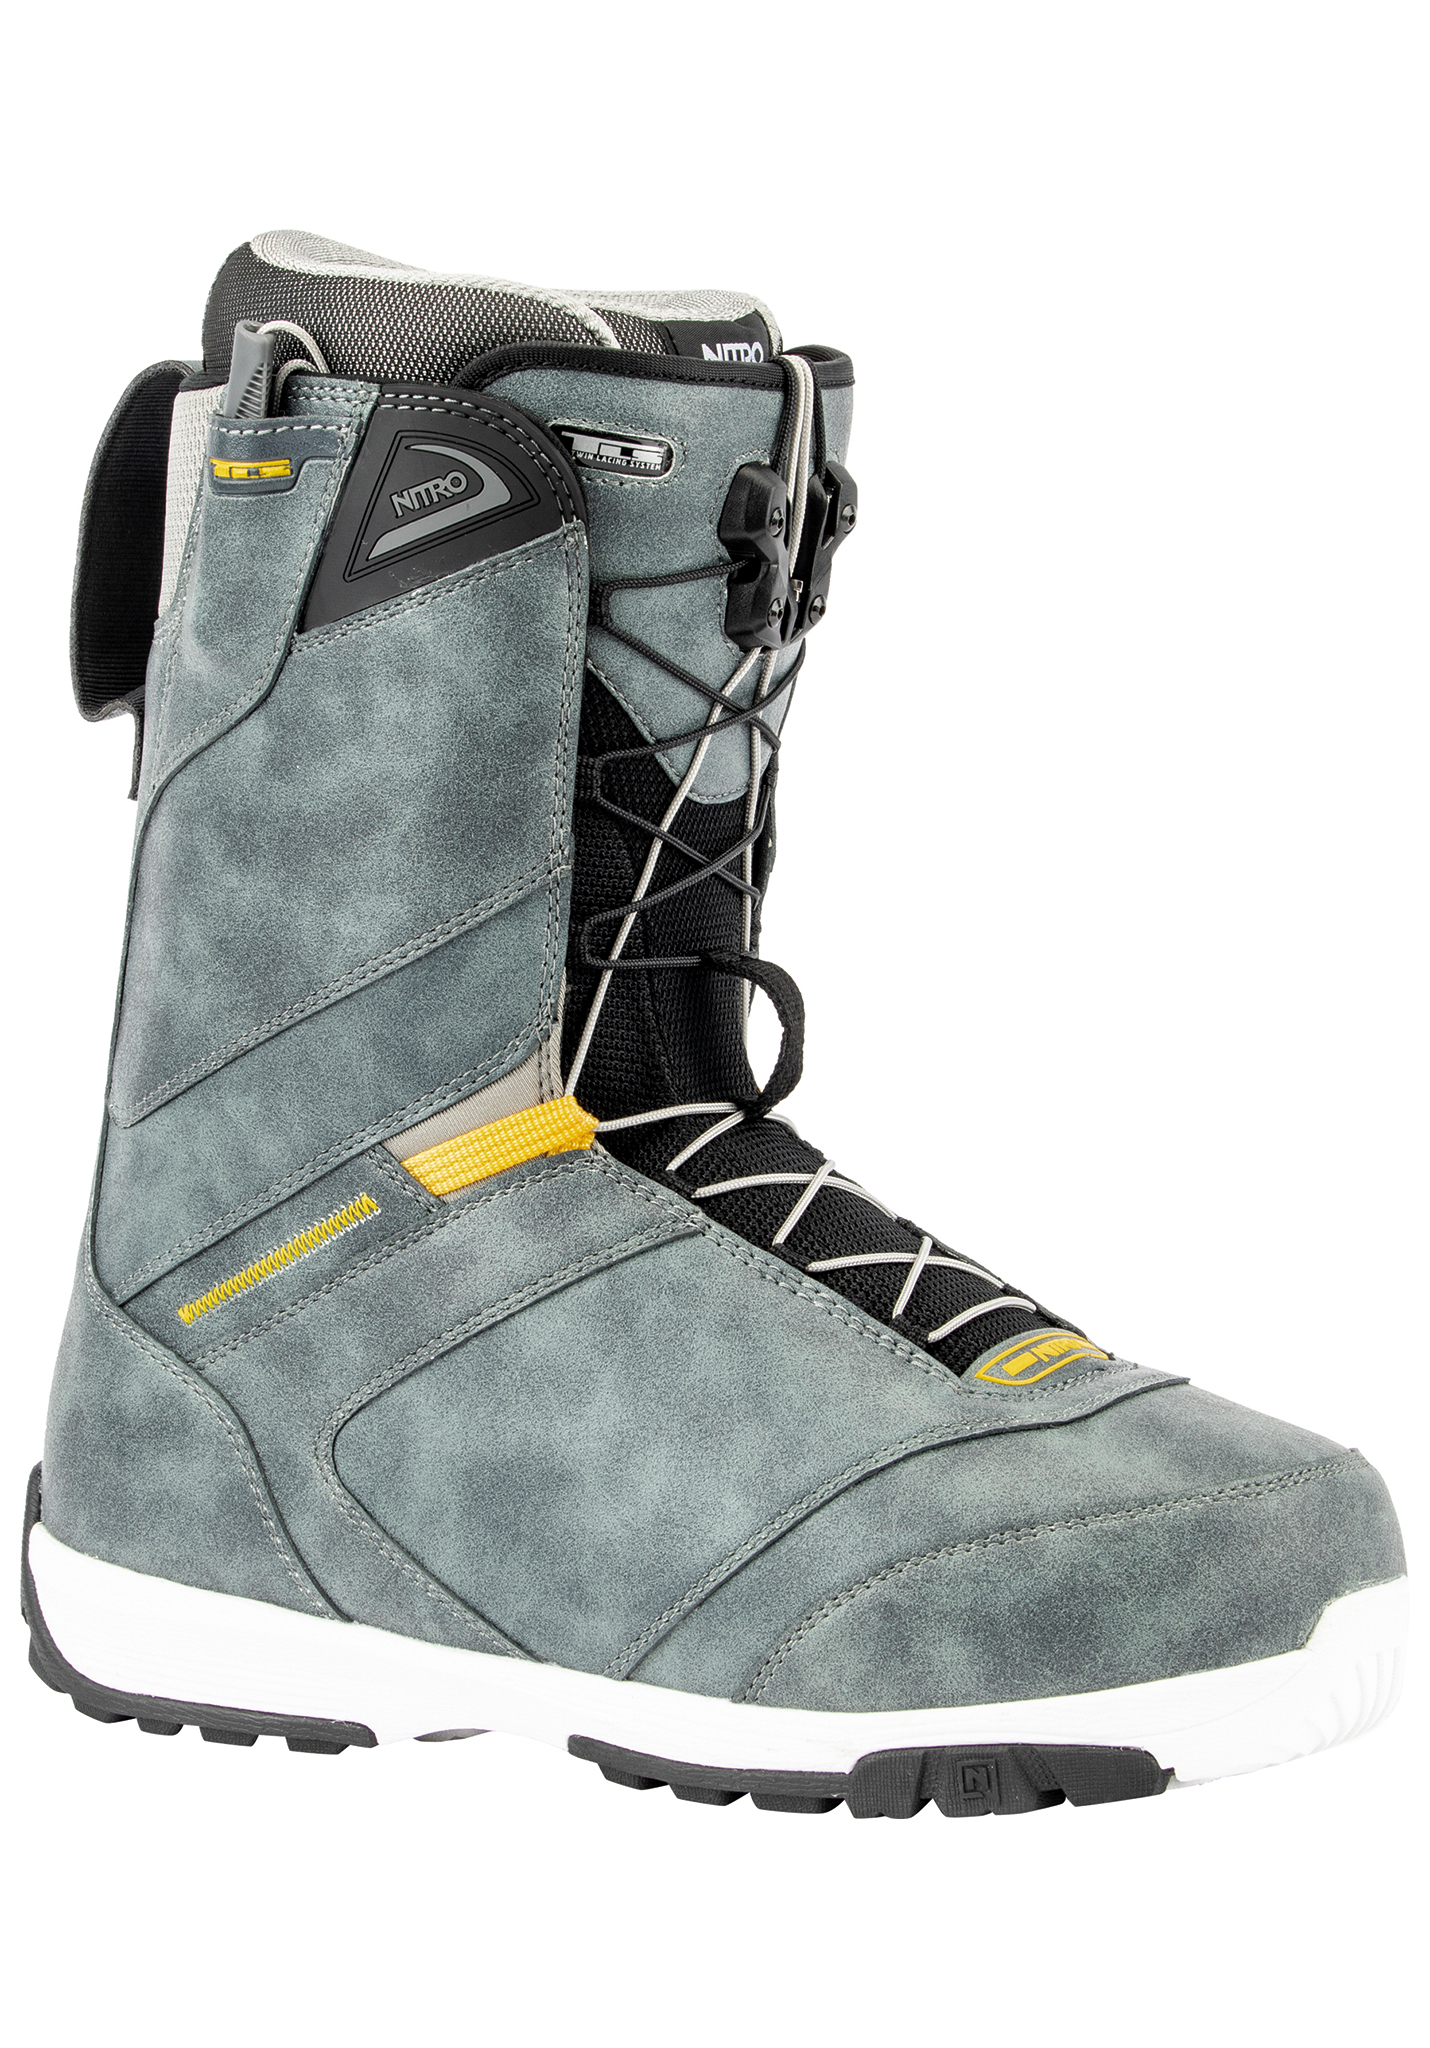 Nitro Anthem TLS All Mountain Snowboard Boots charcoal 47 1/3